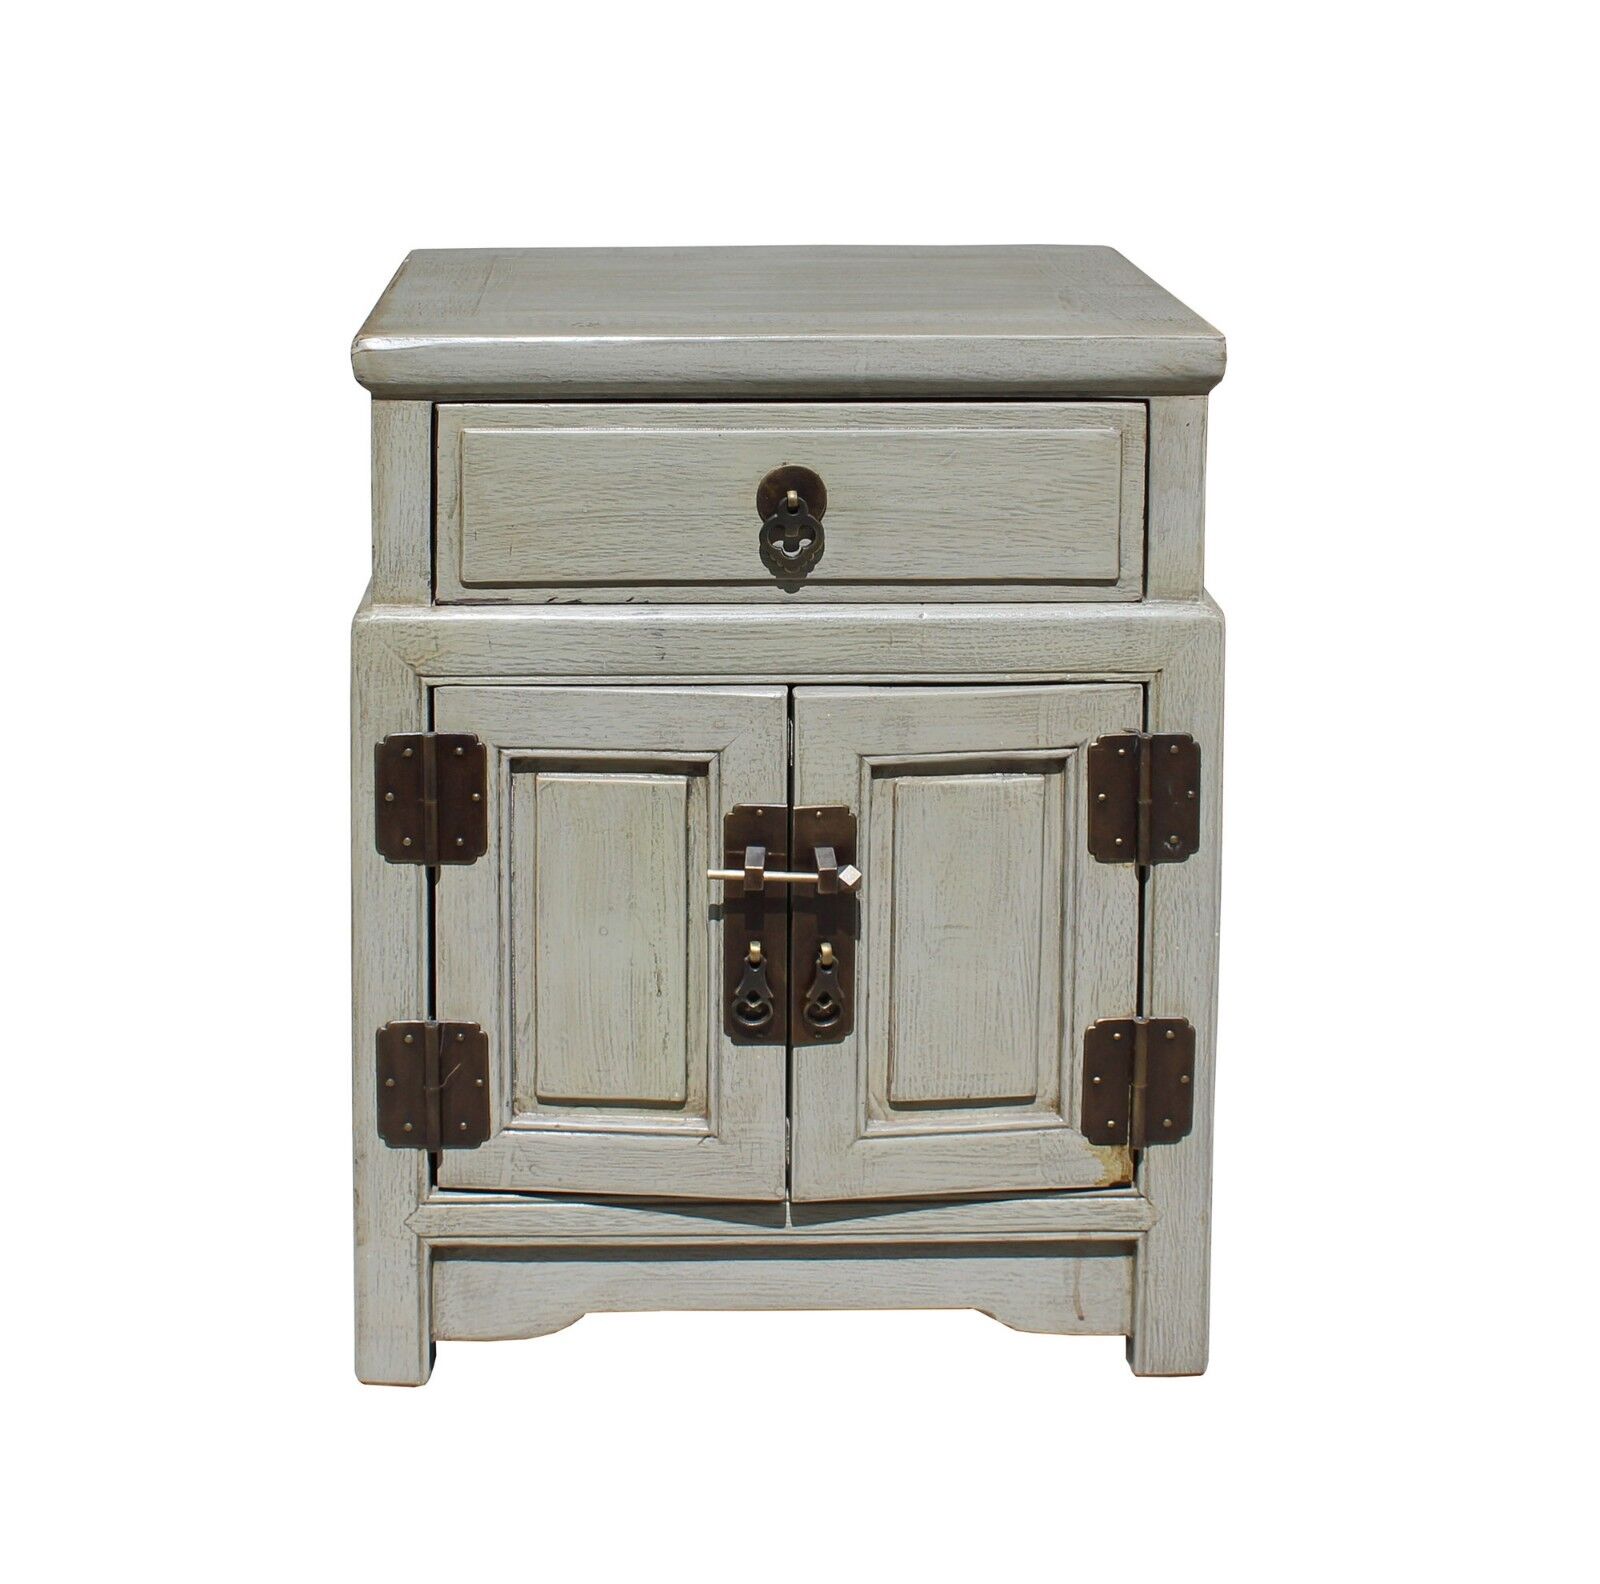 Chinese Distressed Light Gray Metal Hardware End Table Nightstand cs3917 Handmade Does Not Apply